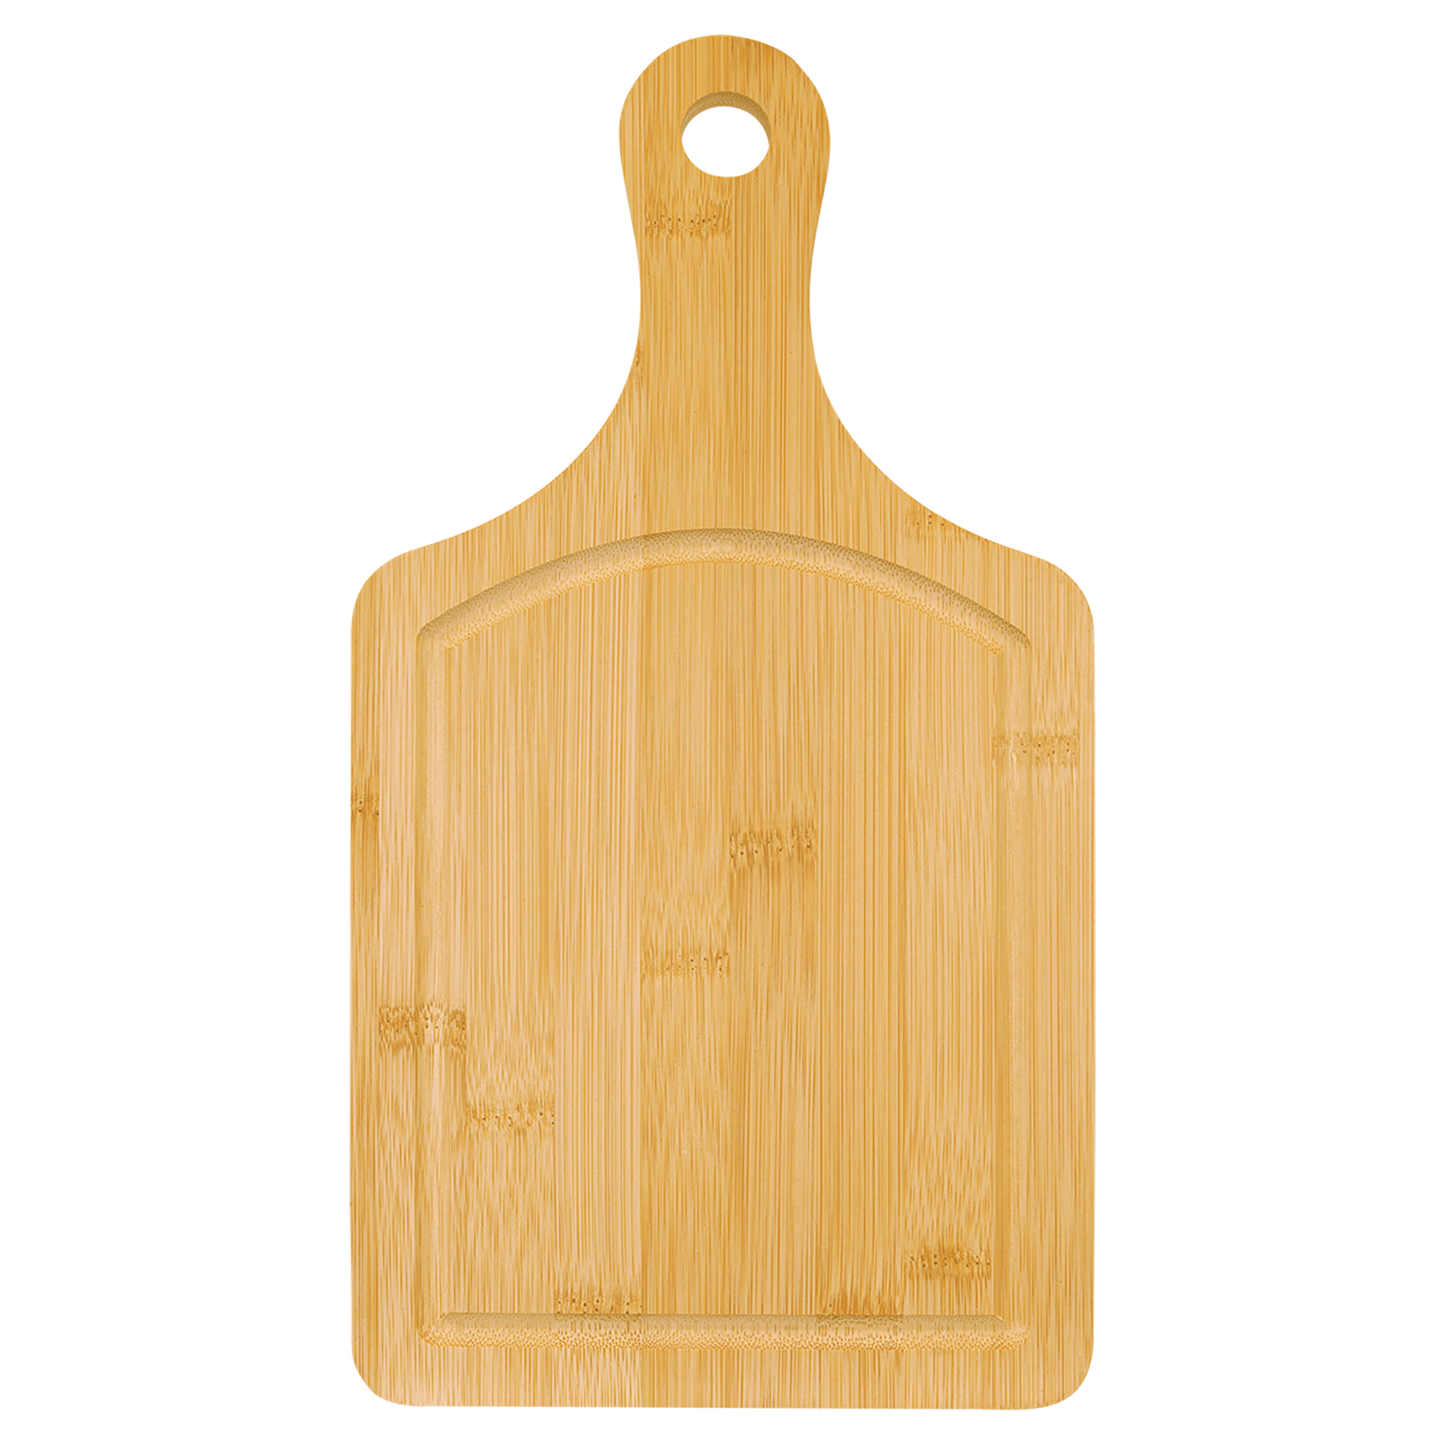 Bamboo Cutting Board Paddle Shape with Drip Ring 13 1/2" x 7"